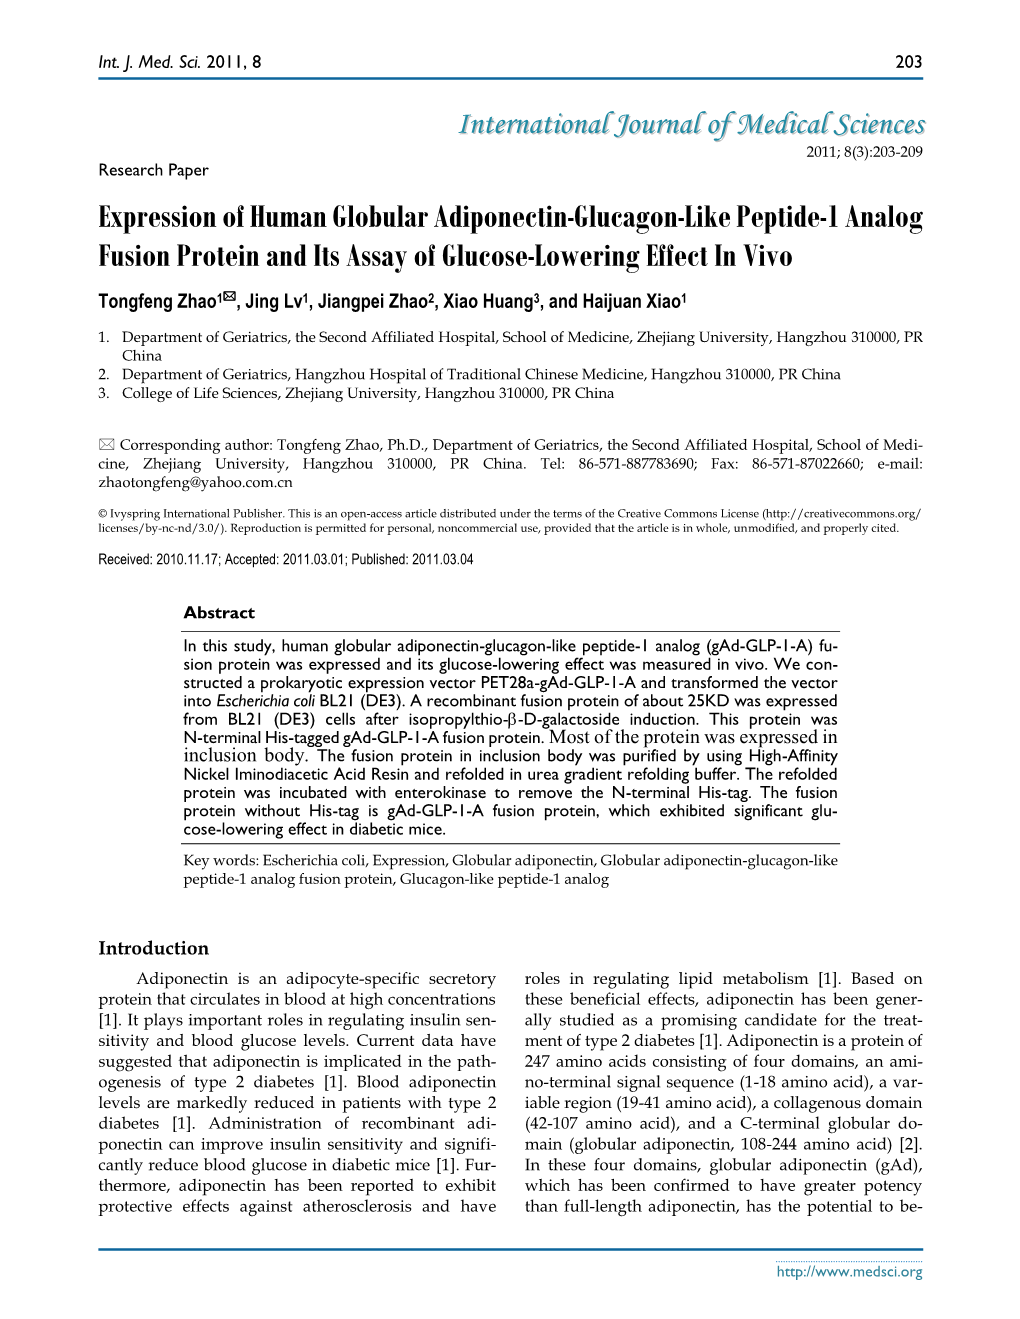 Expression of Human Globular Adiponectin-Glucagon-Like Peptide-1 Analog Fusion Protein and Its Assay of Glucose-Lowering Effect